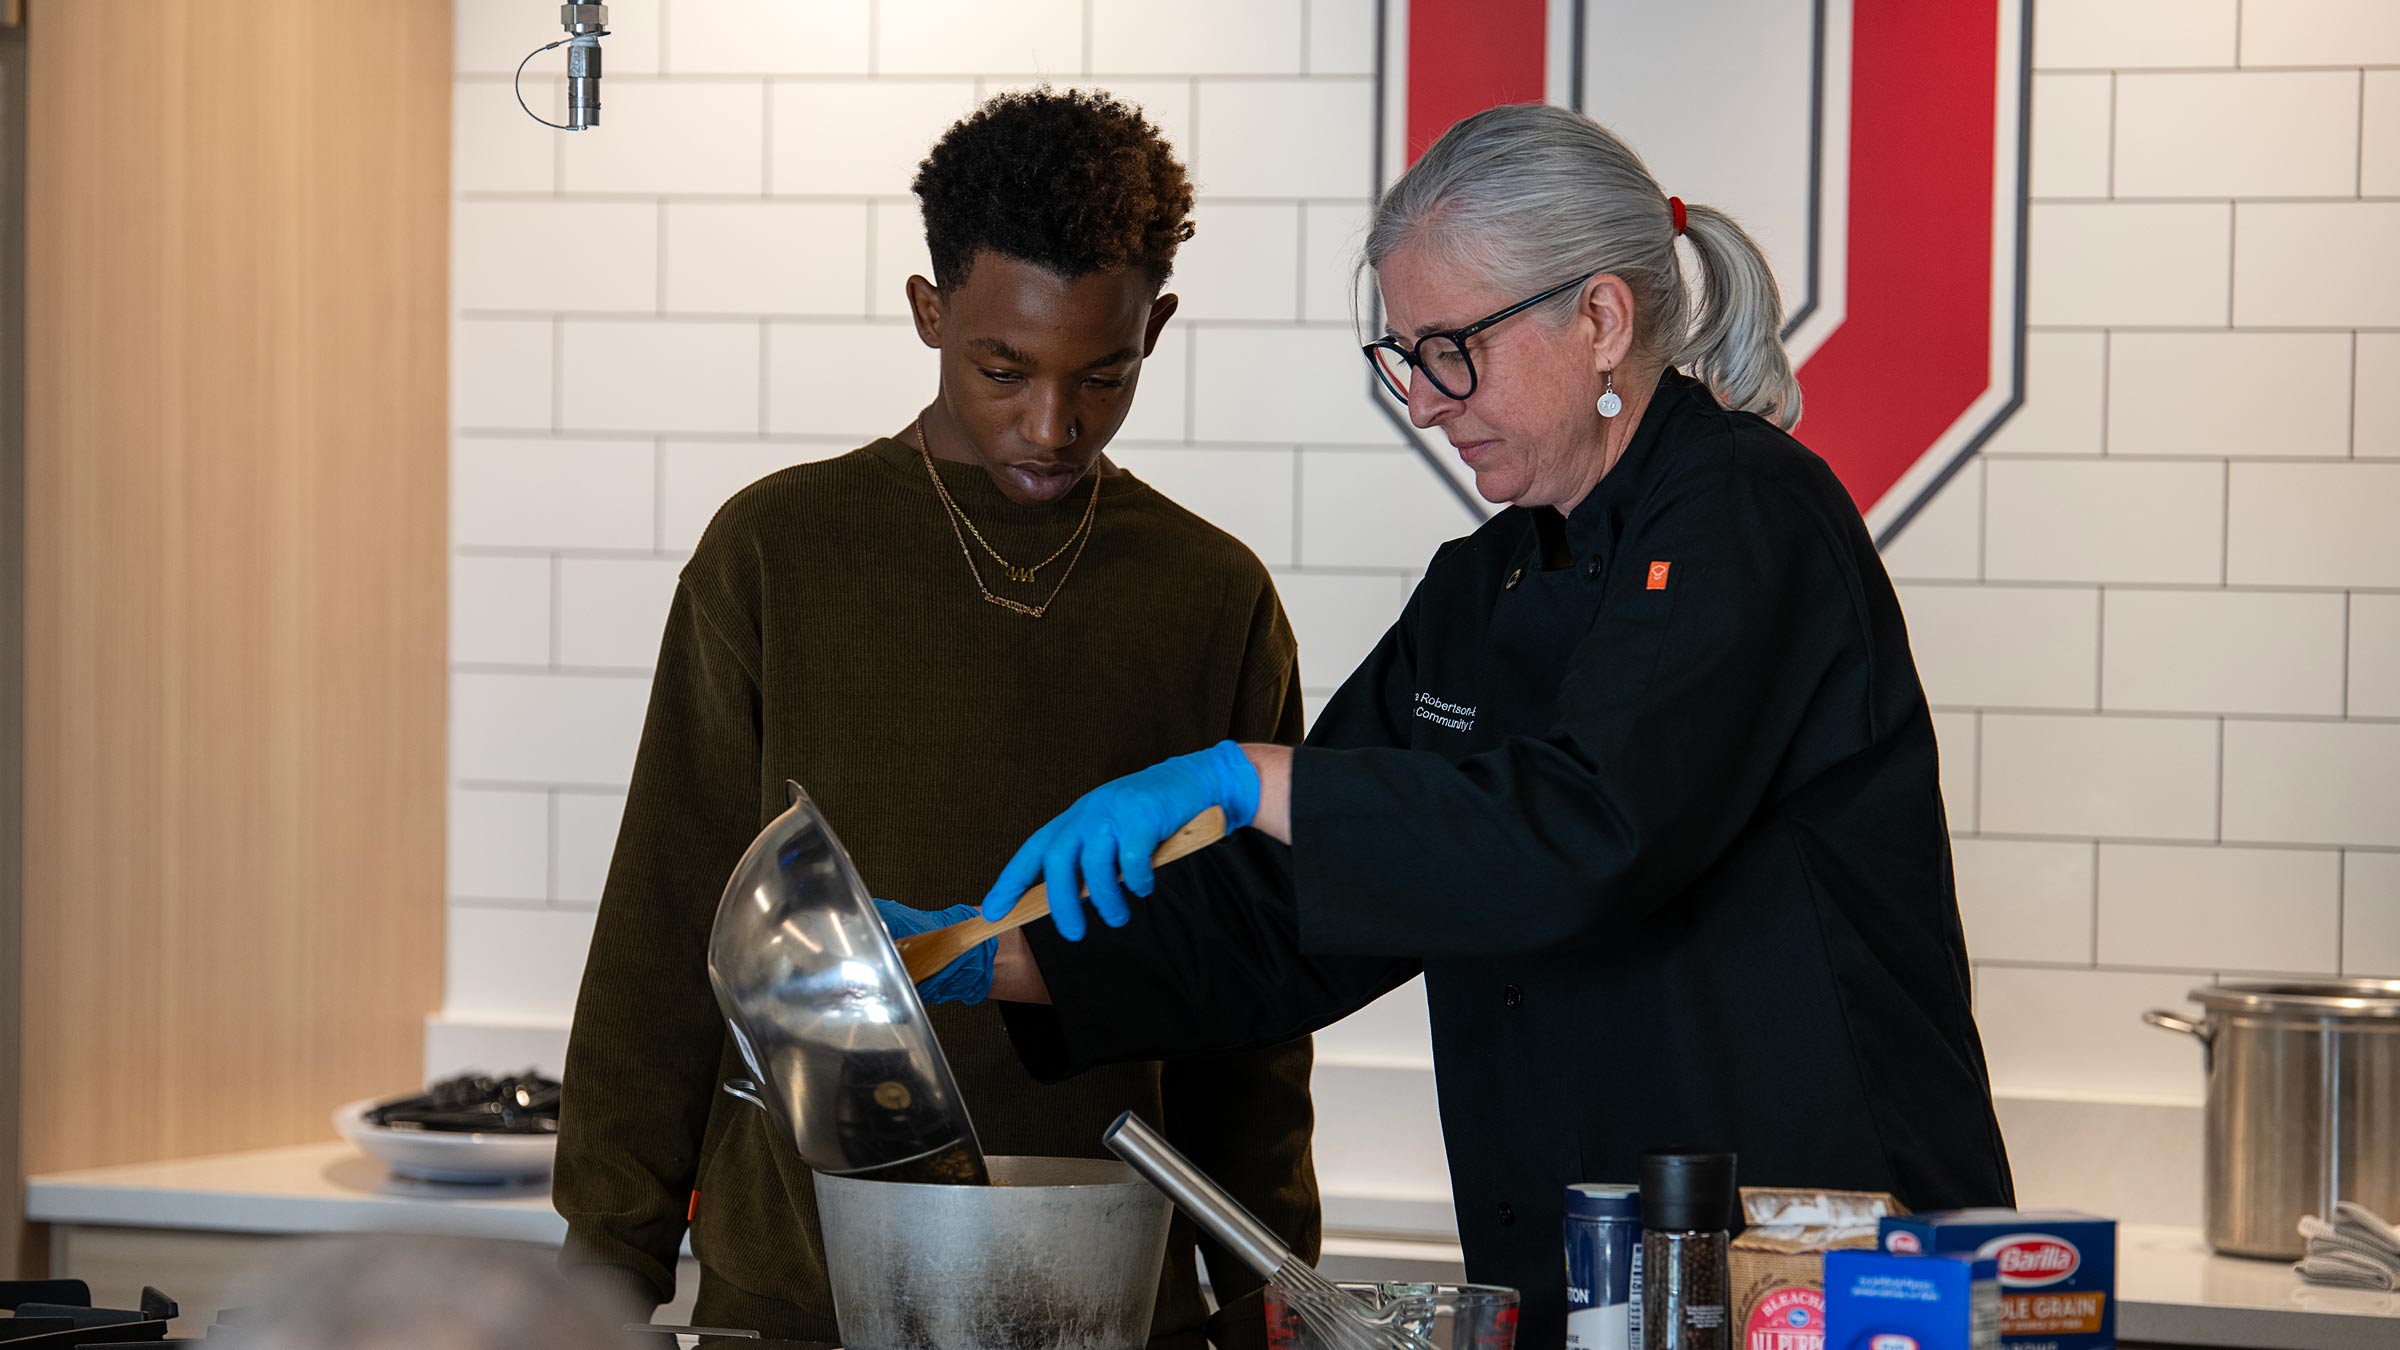 A woman teaching a young male a recipe in a kitchen setting